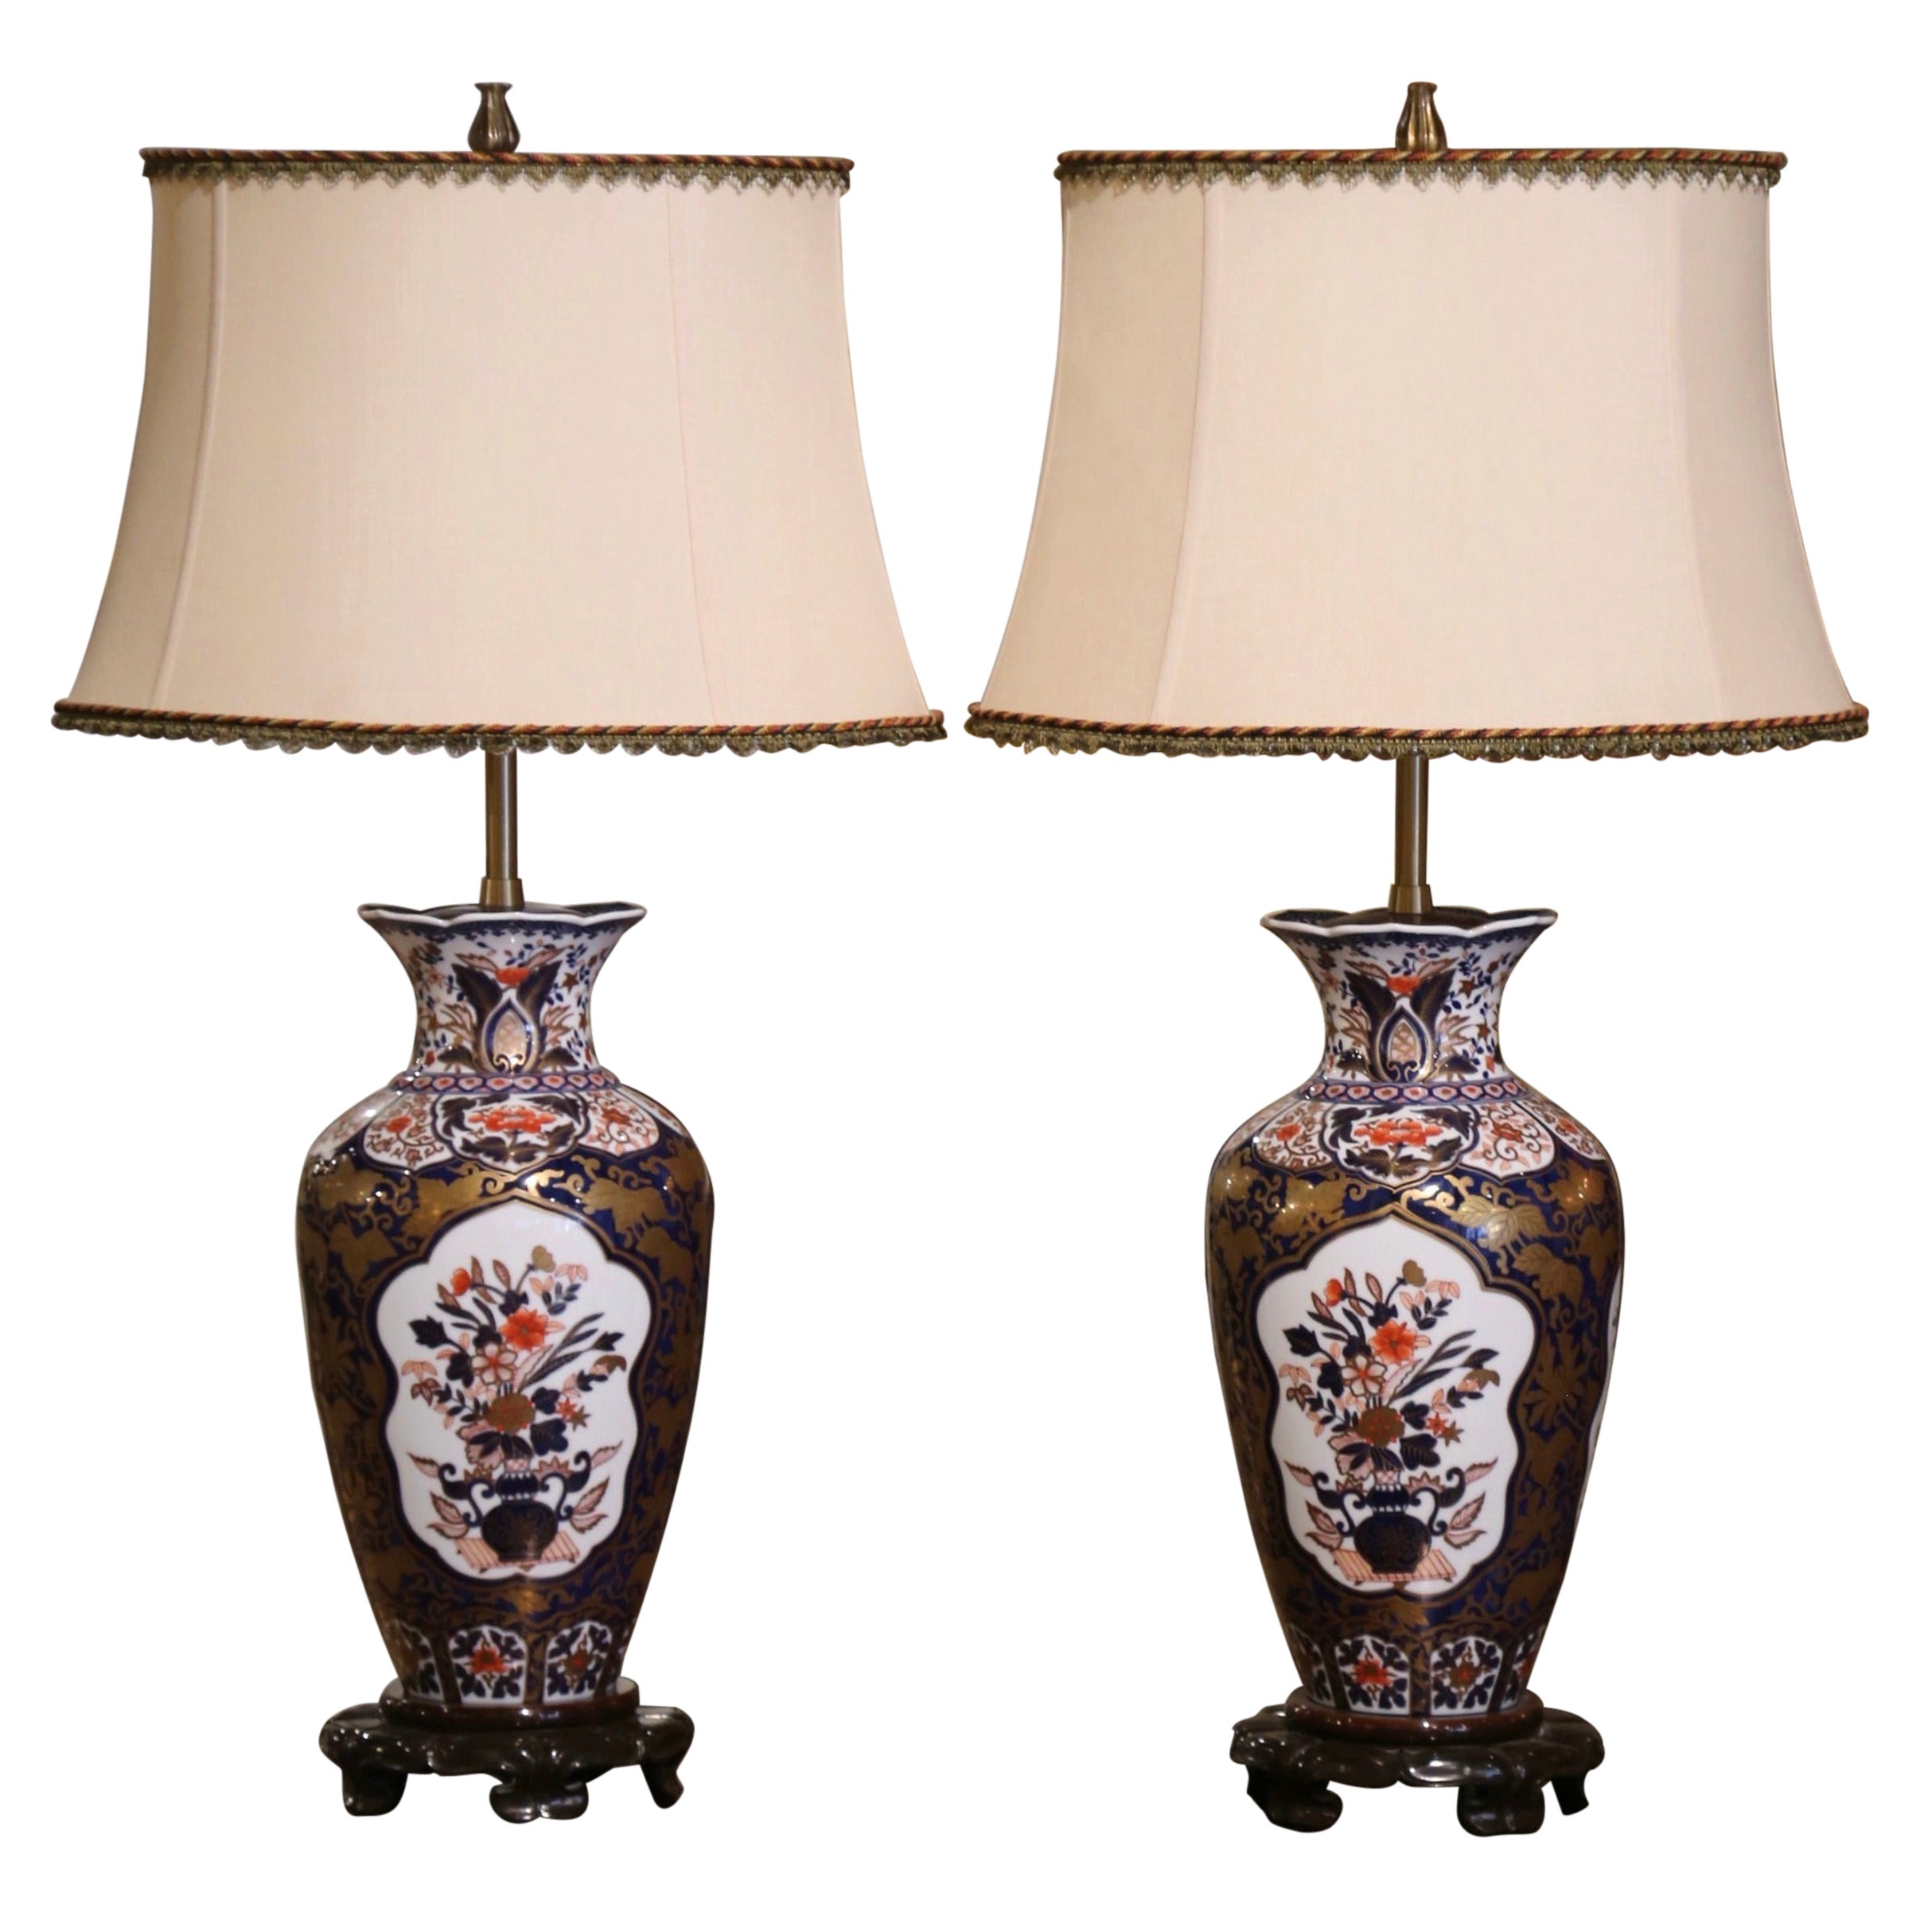 Pair of Early 20th Century Imari Porcelain Vases Mounted as Table Lamps 